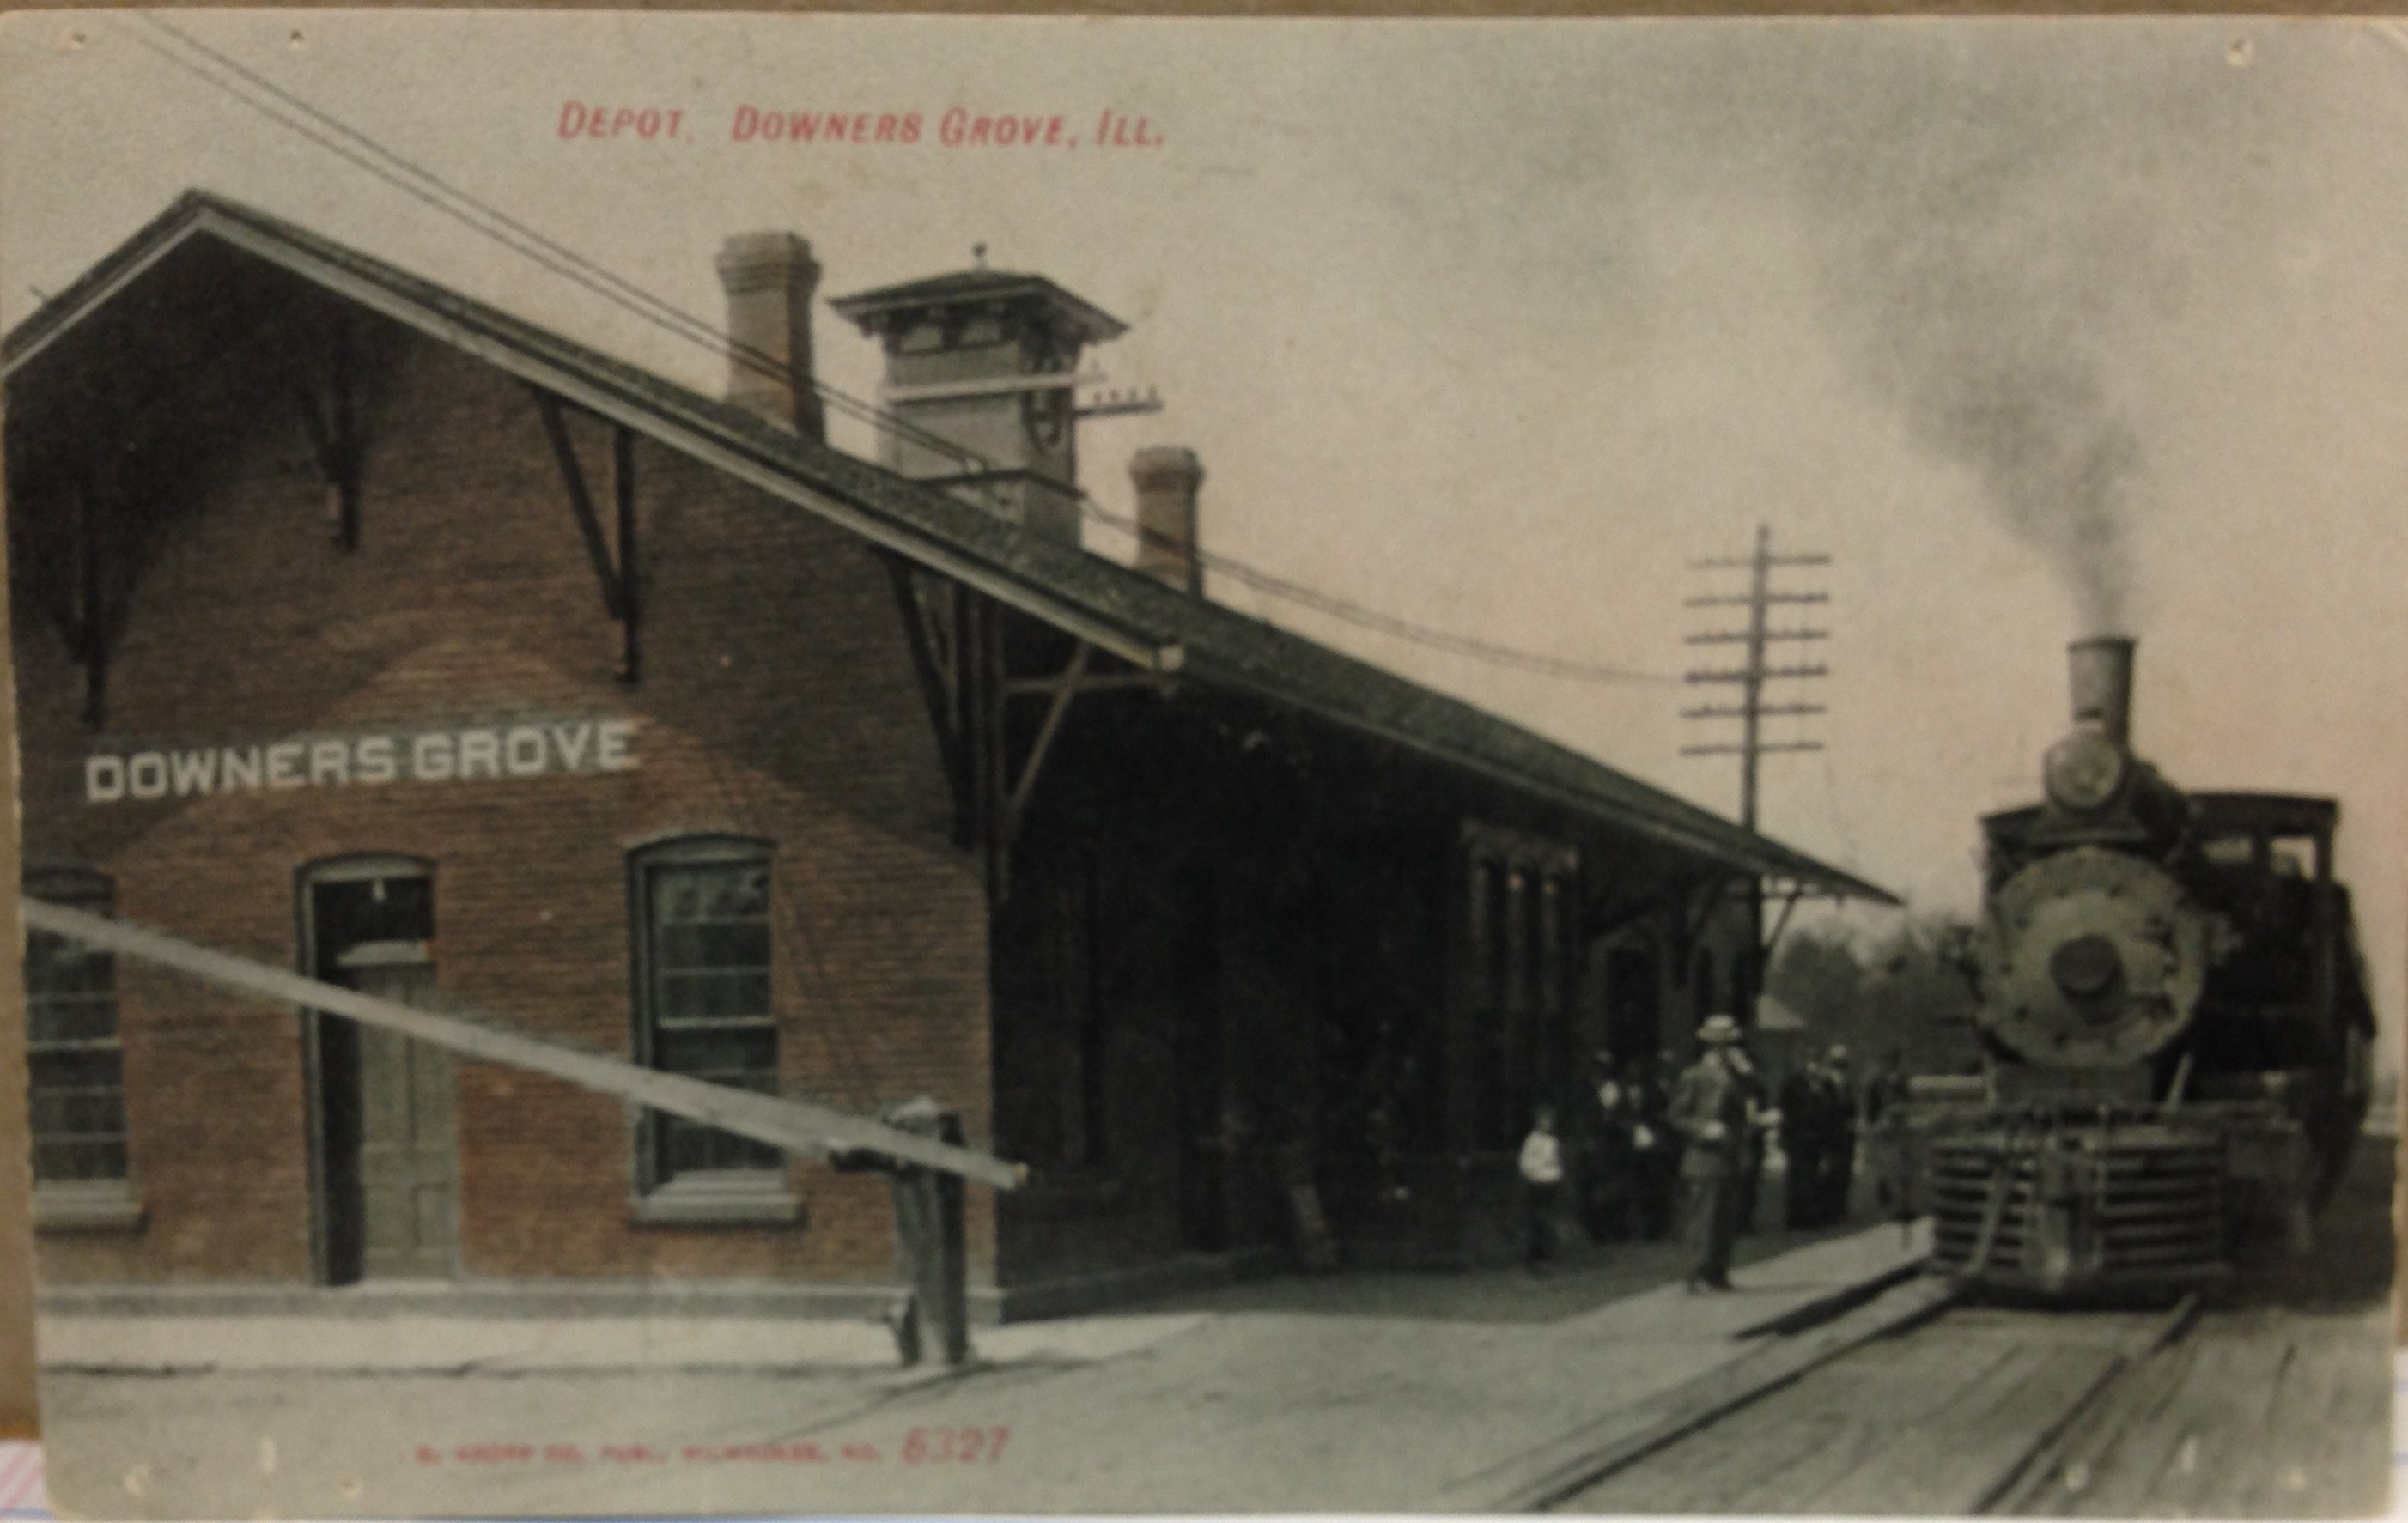 downers grove depot 